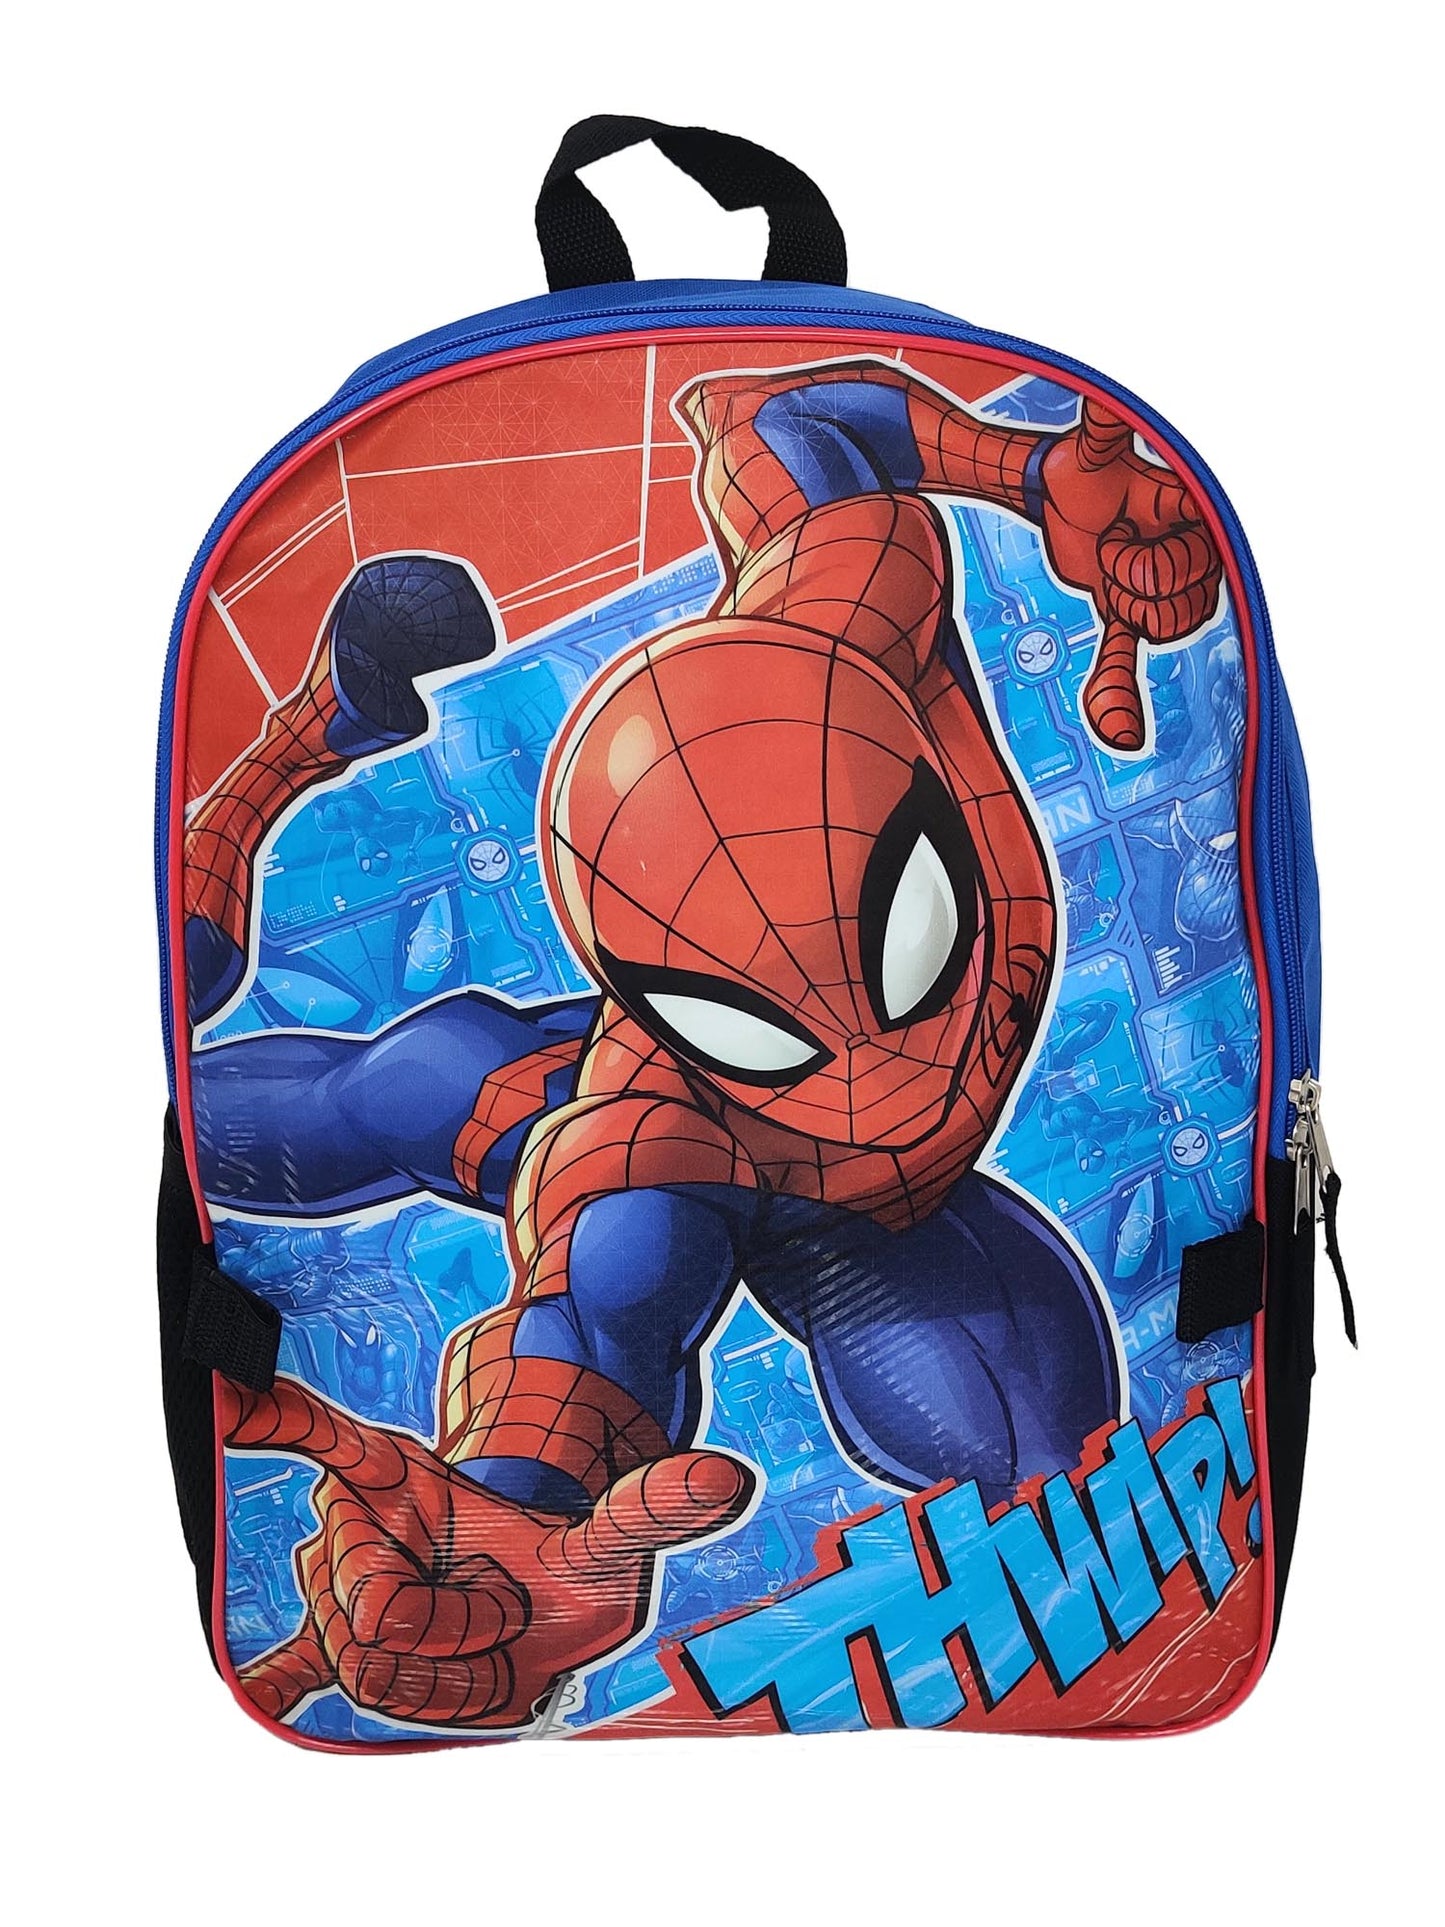 Spider-Man Backpack 16" & Insulated Lunch Bag Detachable 2-Pcs Marvel Boys Blue